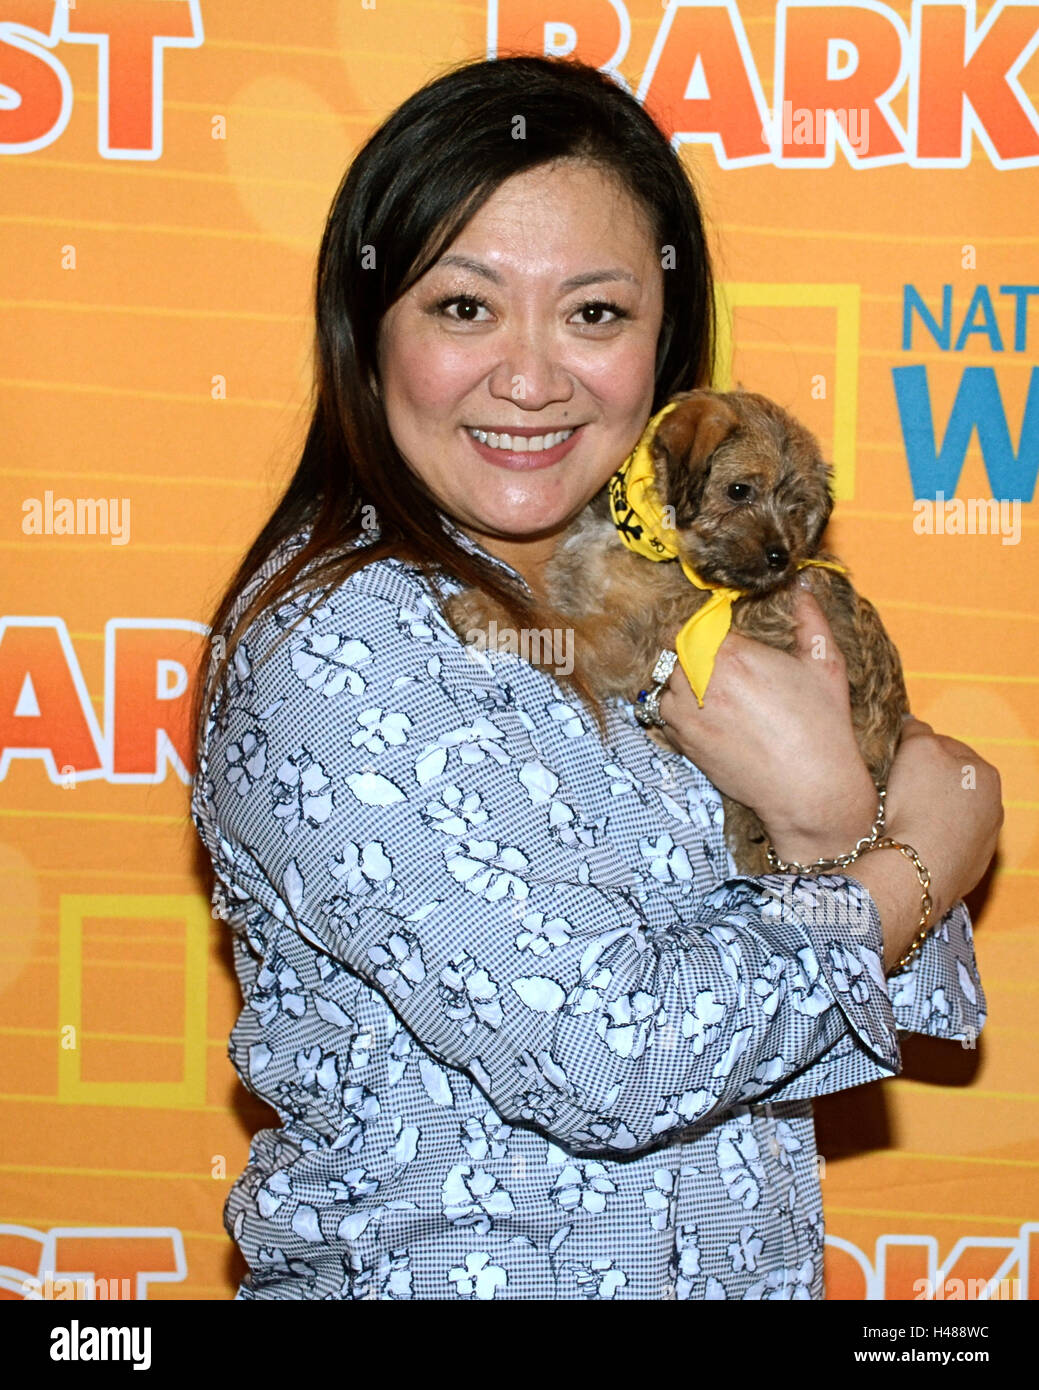 Janet Han Vissering attends Nat Geo WILD 2nd Annual Barkfest at Palihouse Hotel on April 9, 2016 in West Hollywood, California. Stock Photo